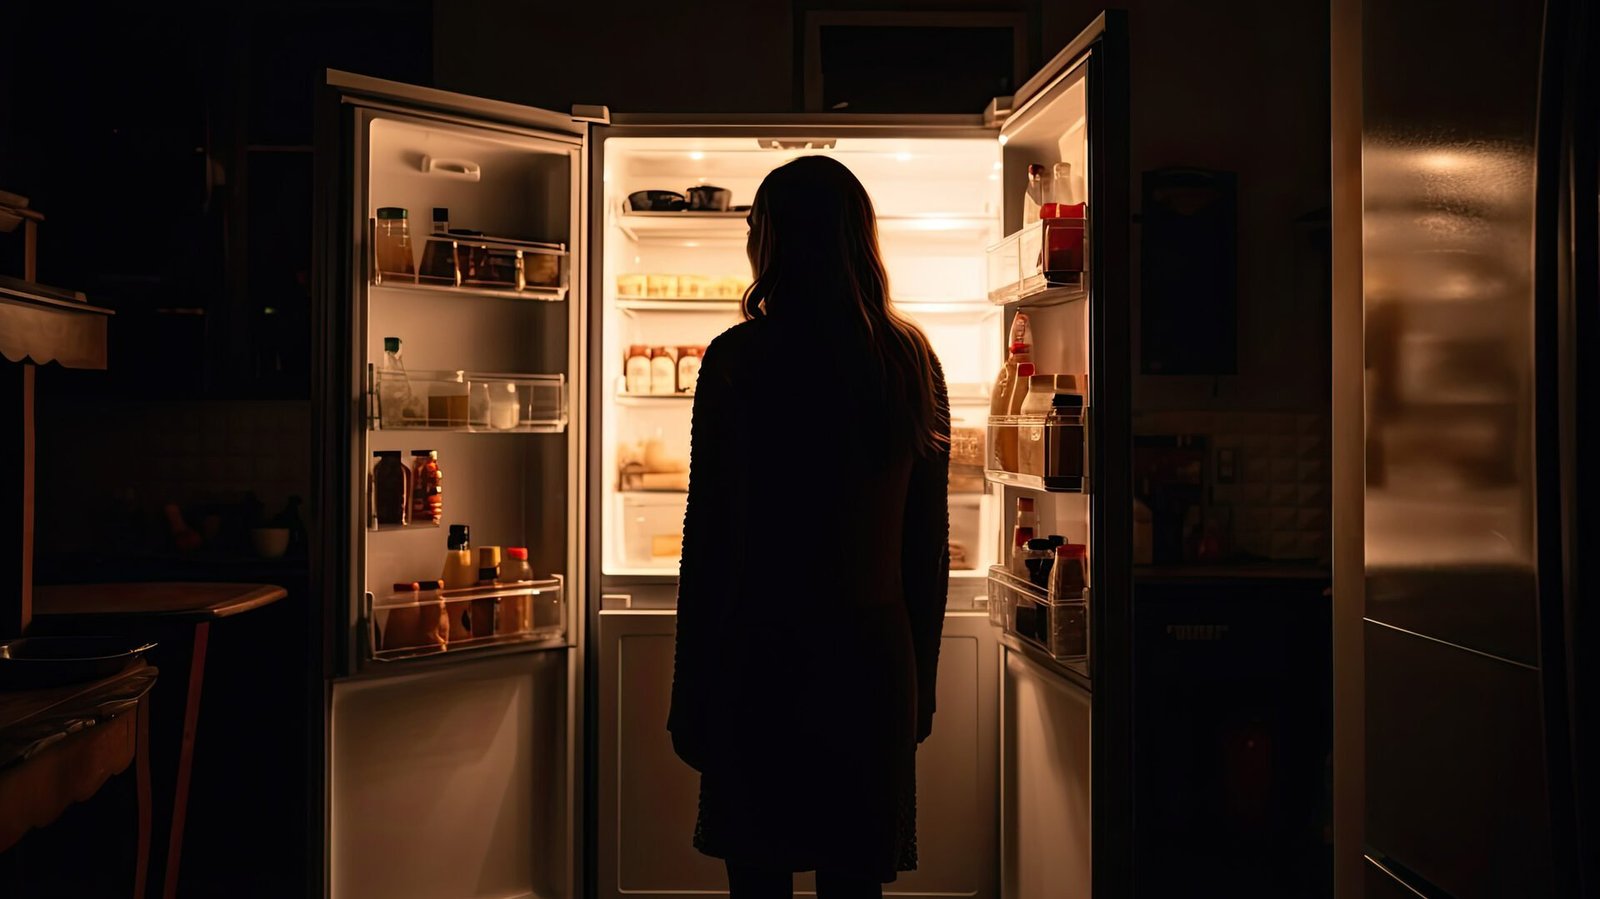 A woman standing in front of an open refrigerator in the dark.